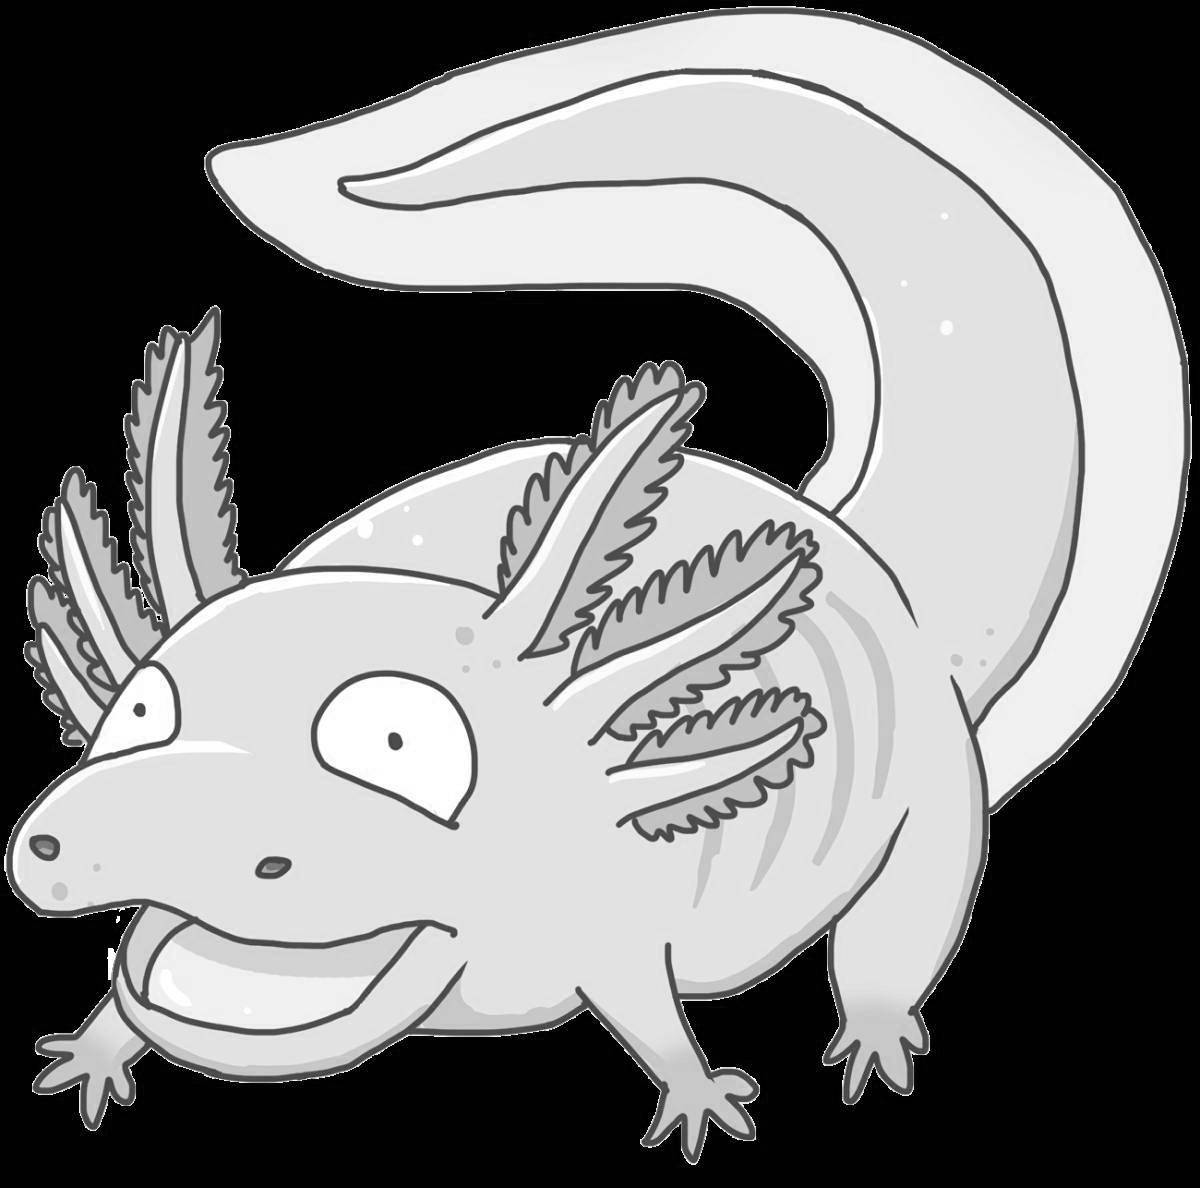 Attractive axelot coloring page